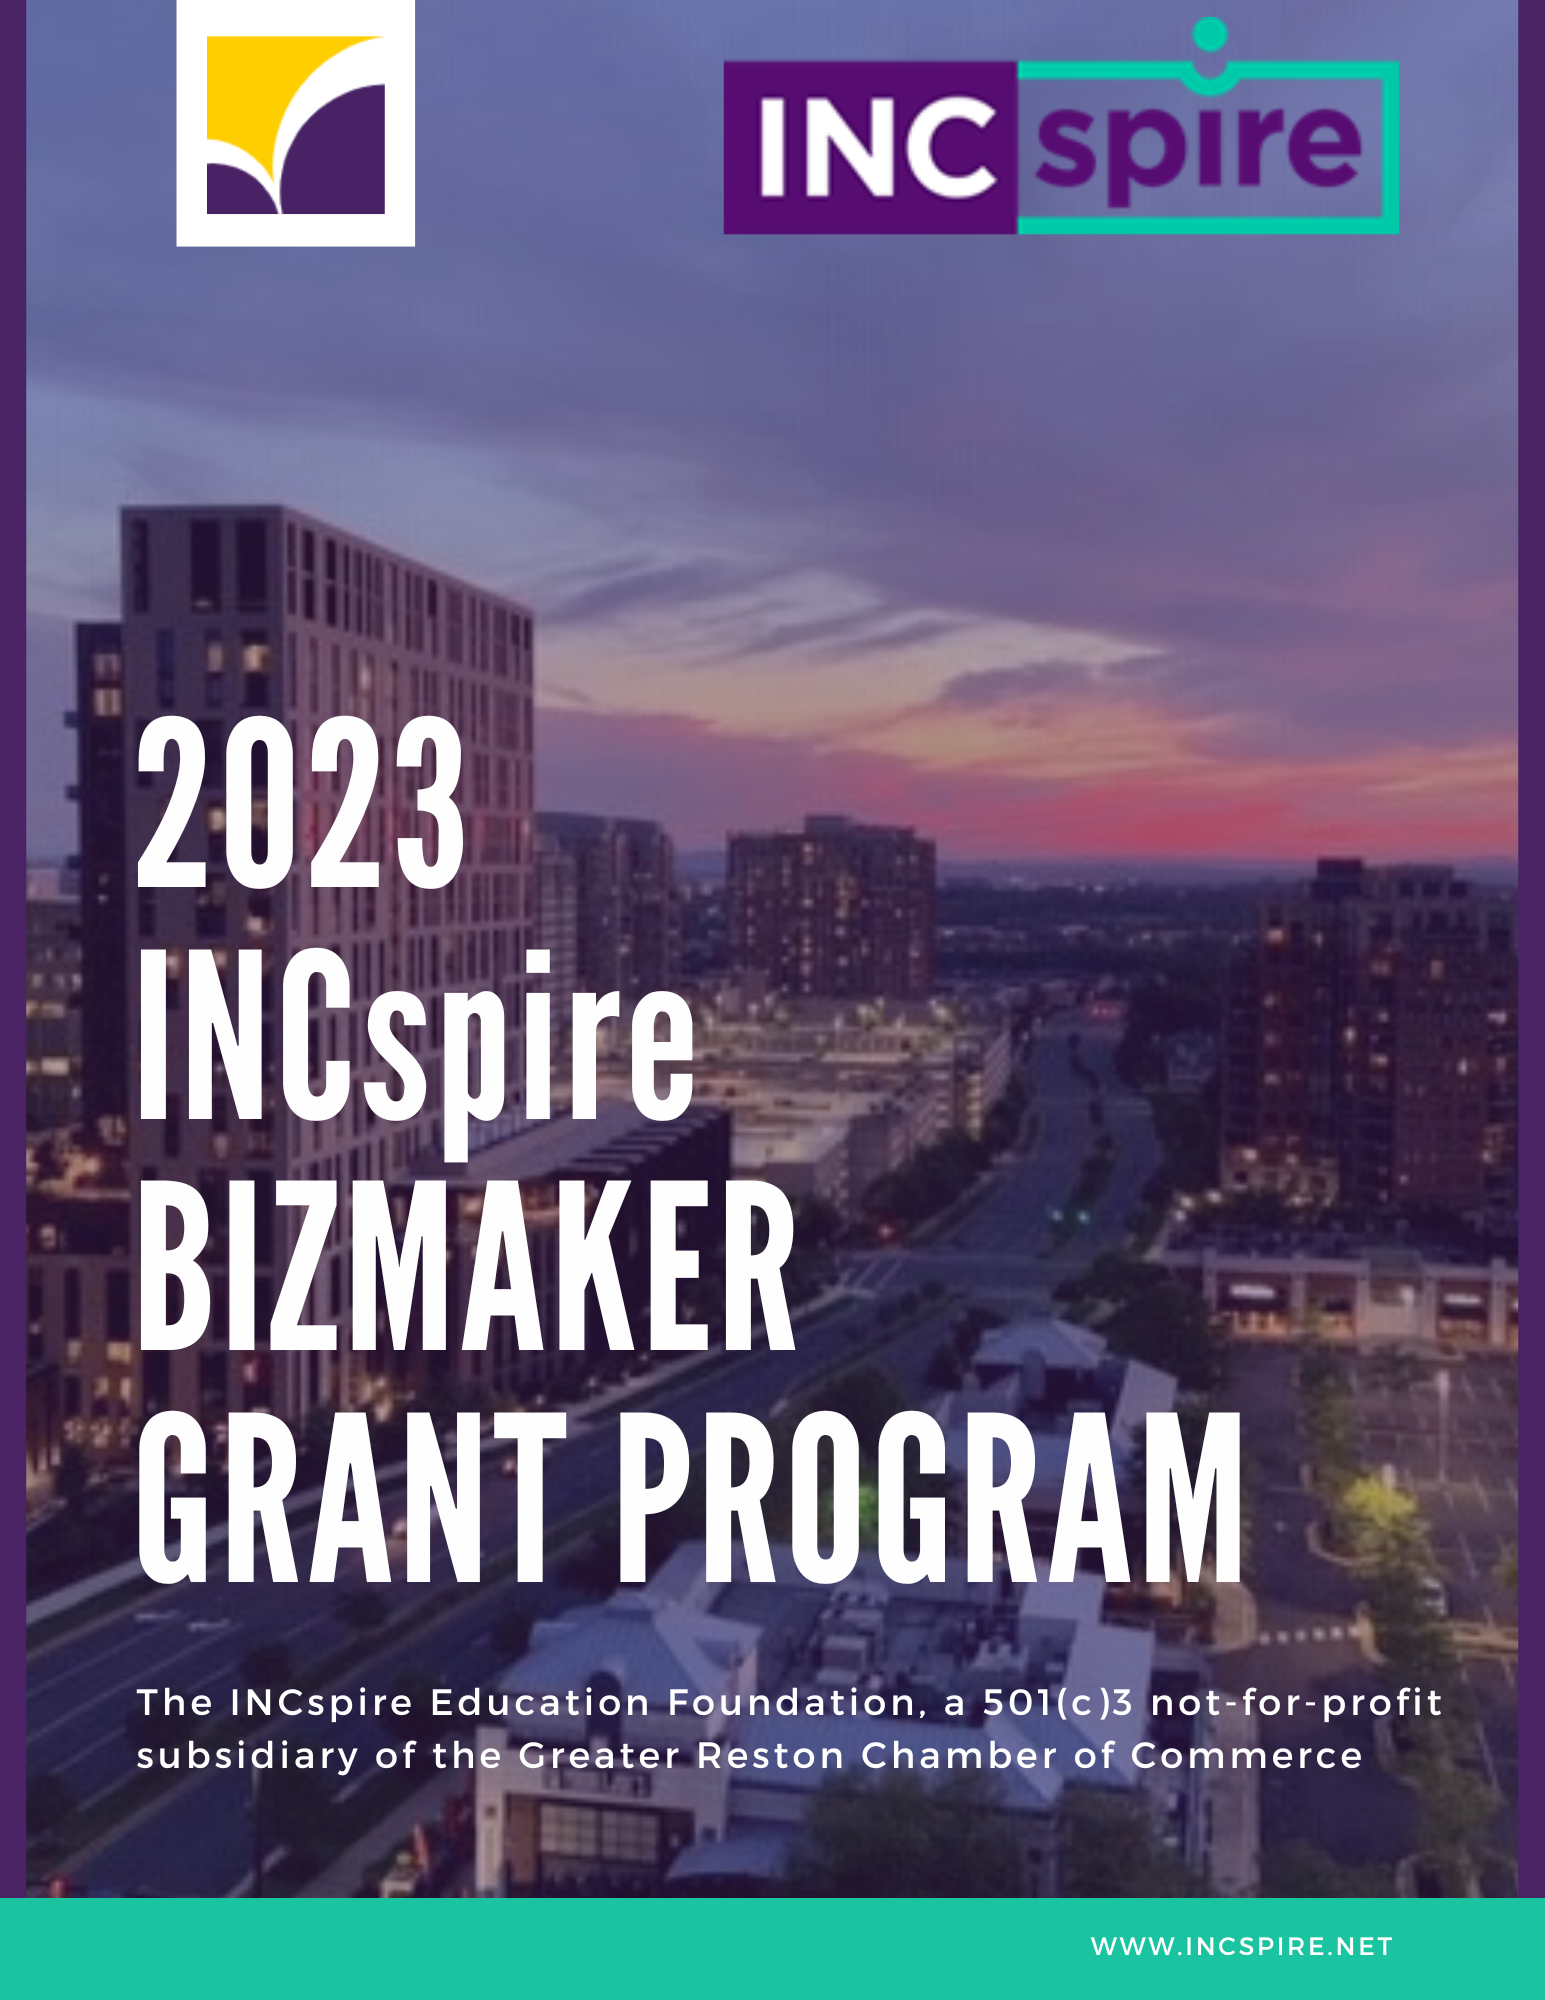 Image for GRCC Now Accepting 2023 INCspire BizMaker Grant Applications